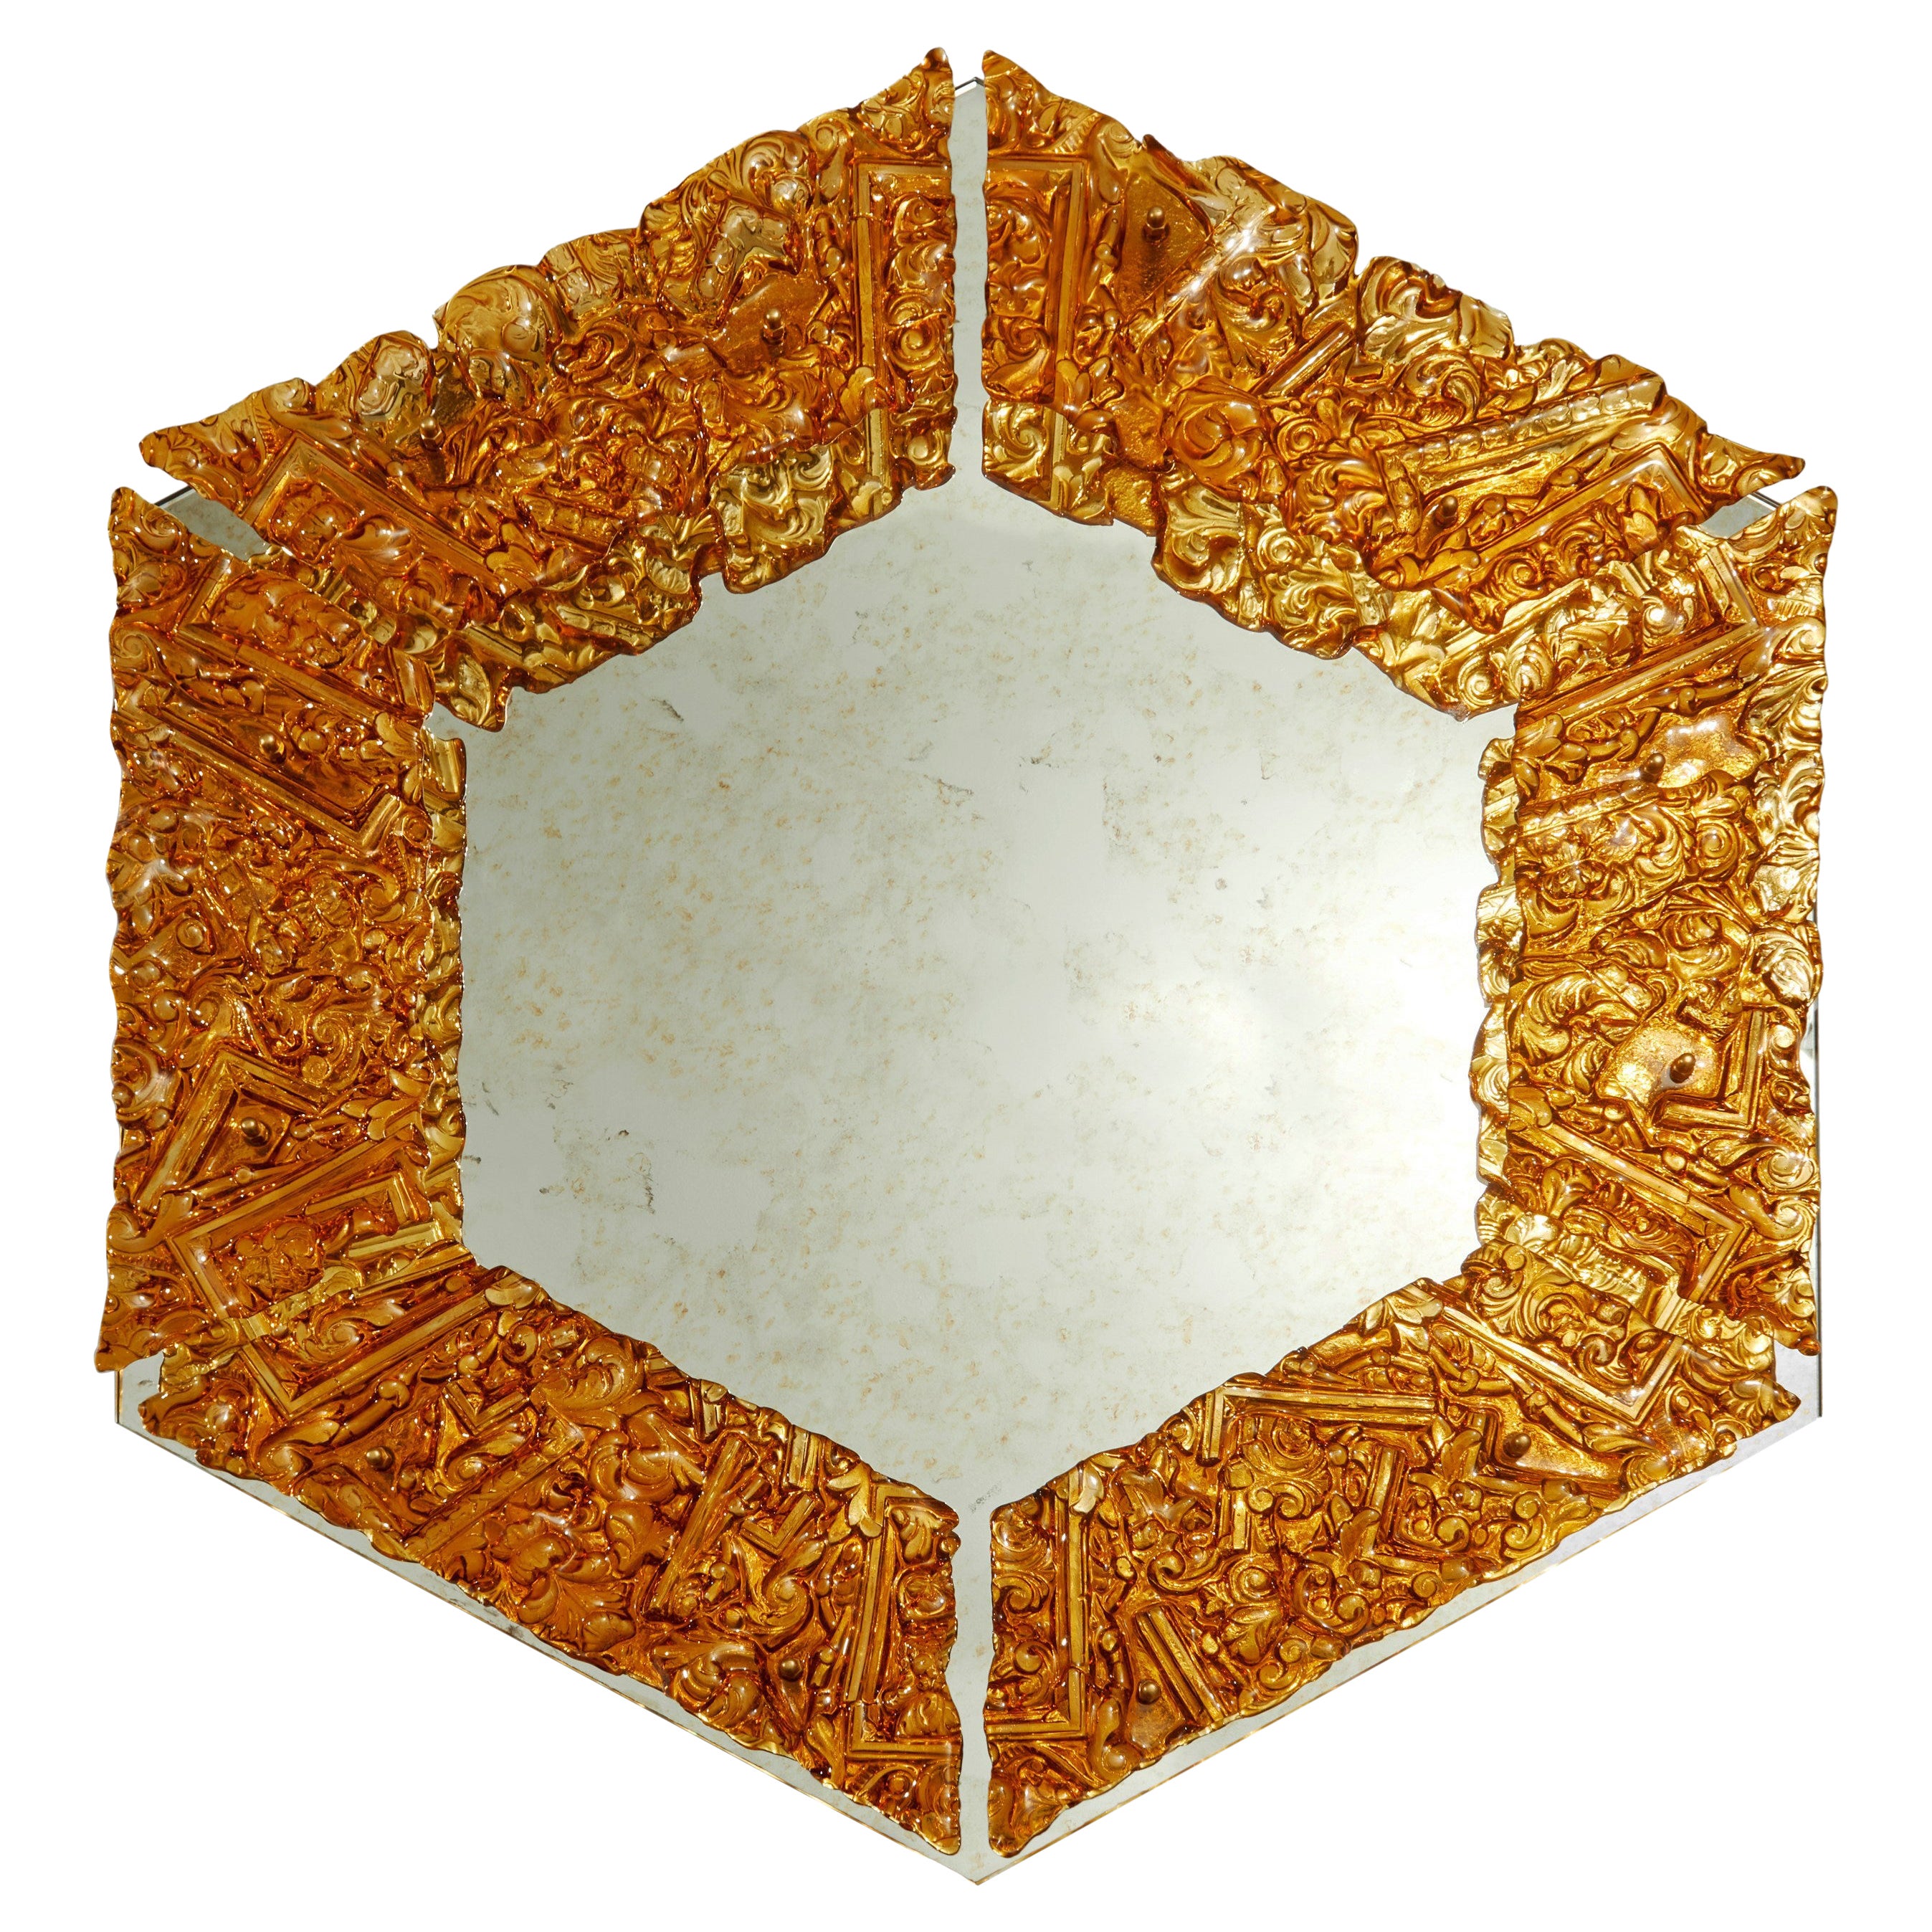 Amber Mirror, a Unique Ornate Handcrafted Fused Glass Mirror by Brett Manley For Sale